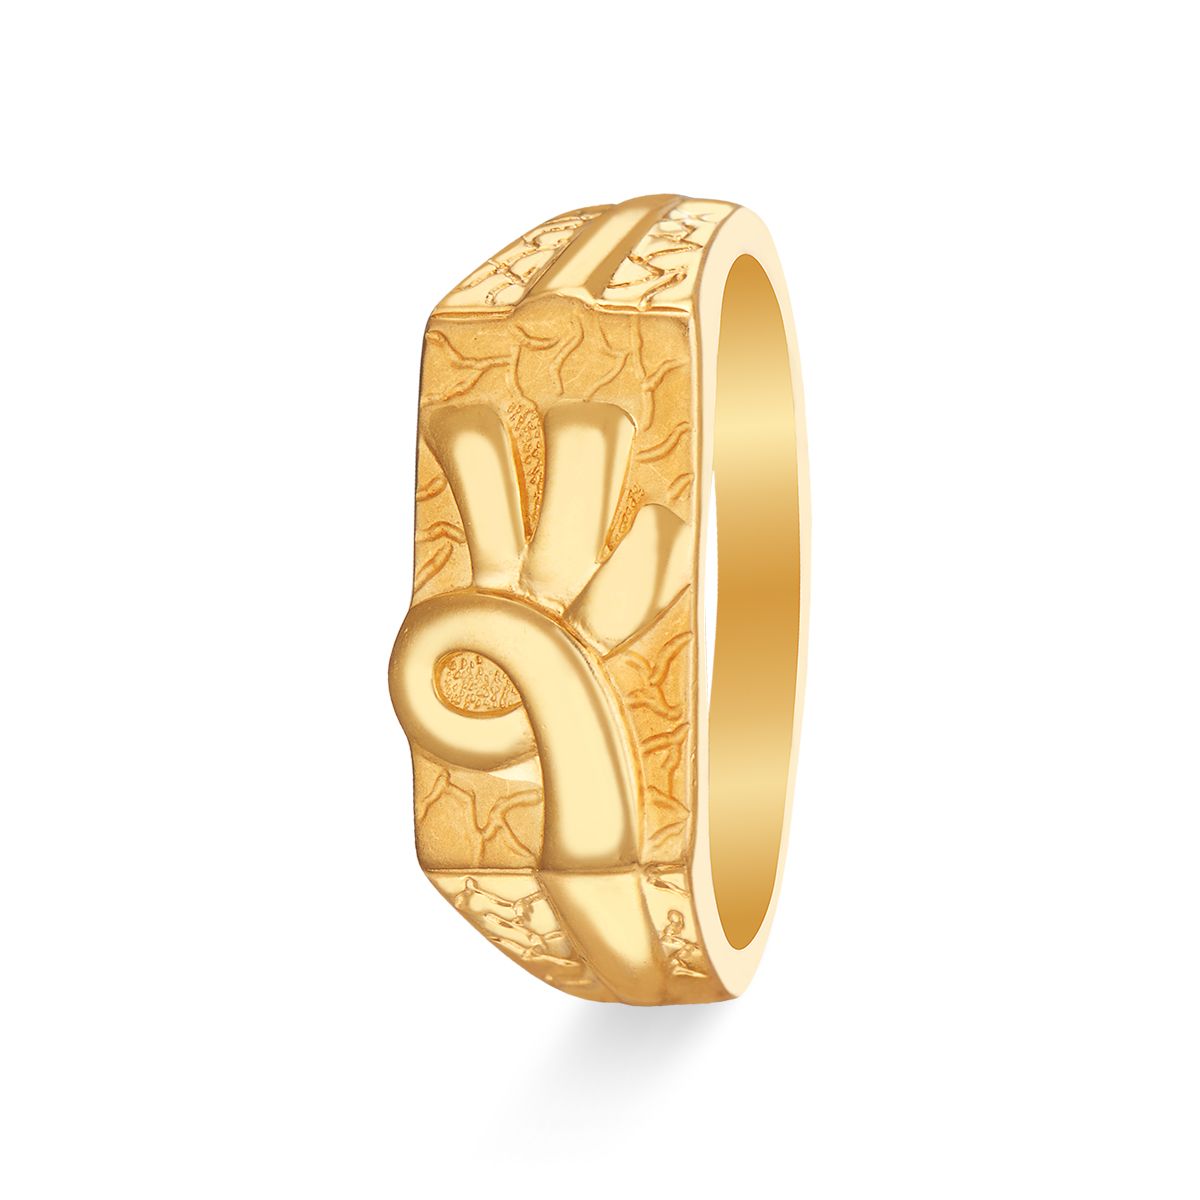 8 Gold Ring Designs for Men That Will Never Go Out Of Fashion